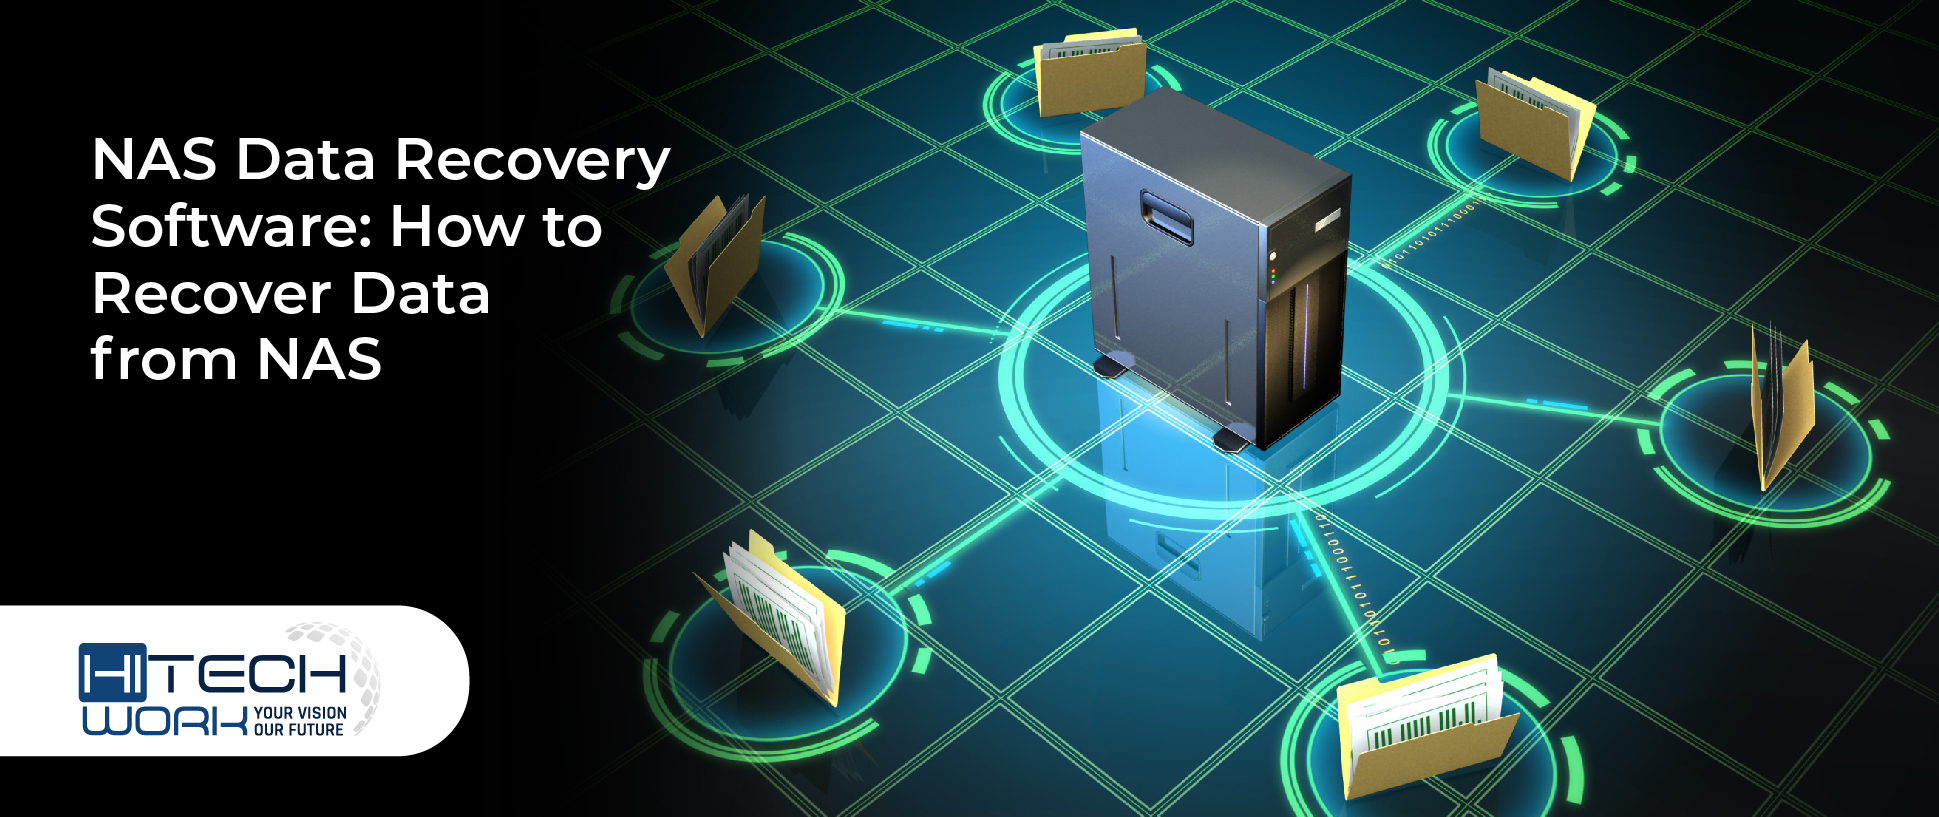 NAS Data Recovery Software